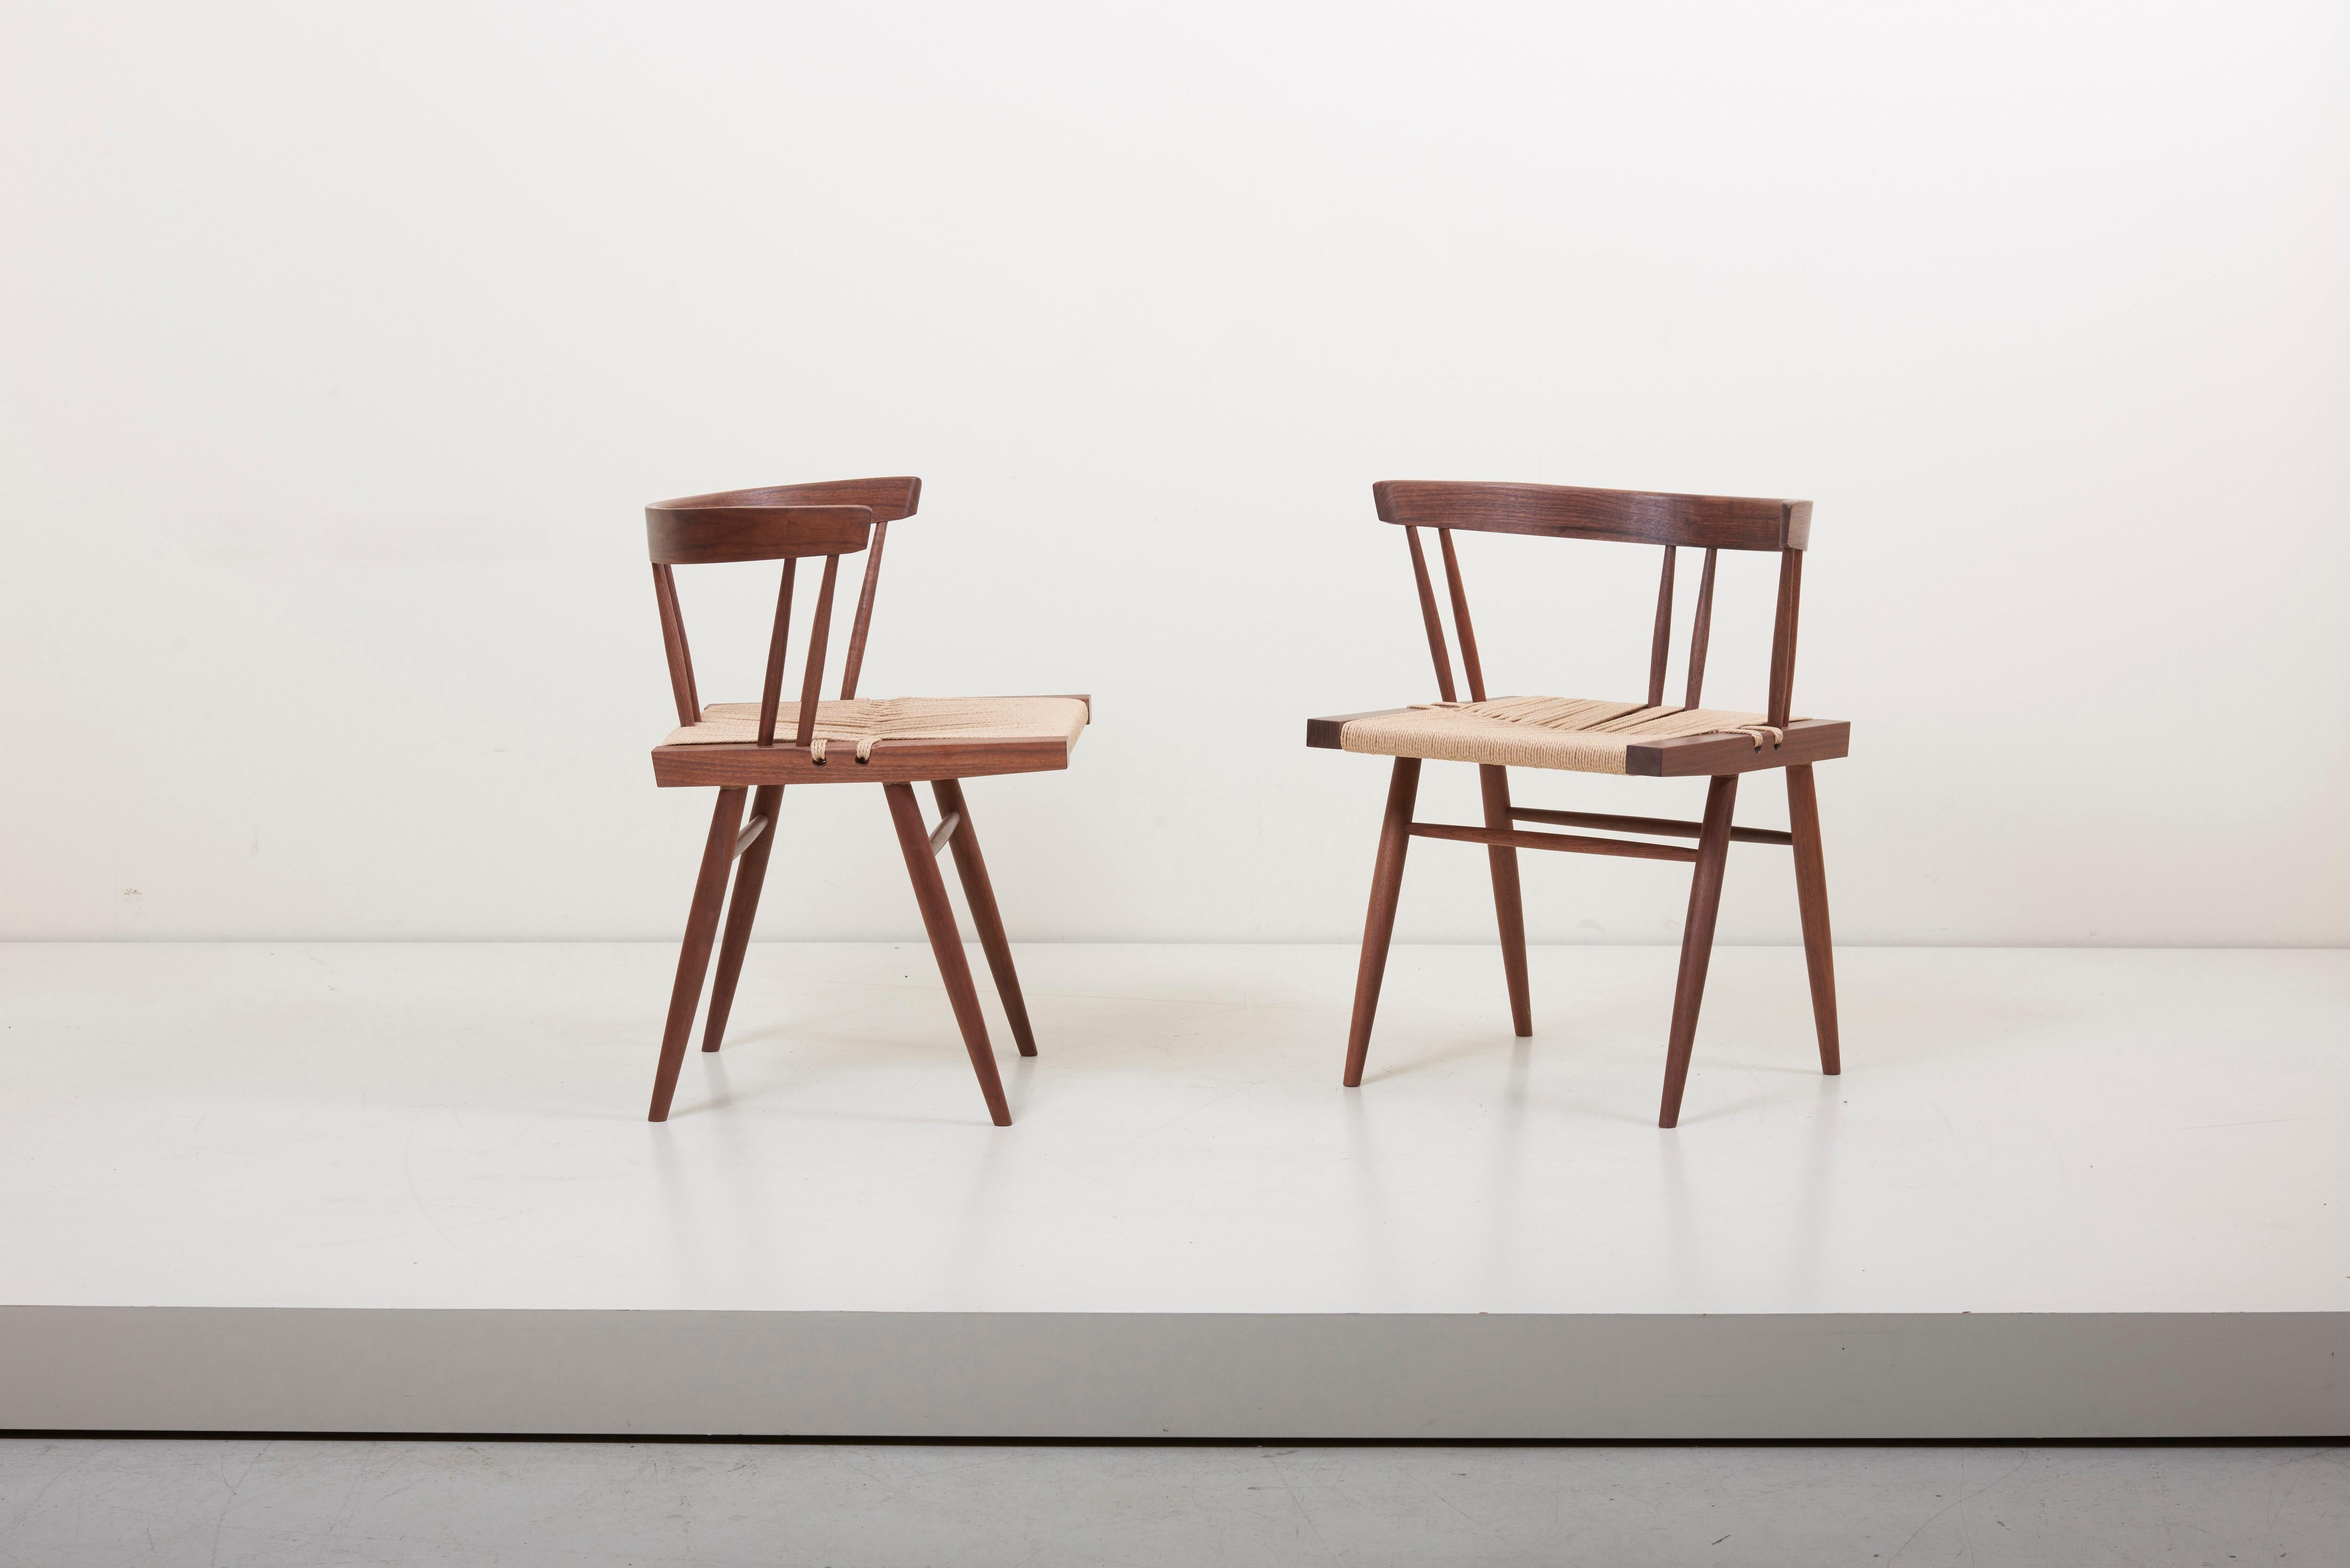 American Set of Six Grass Seated Dining Chairs by George Nakashima Studio, US - 2019